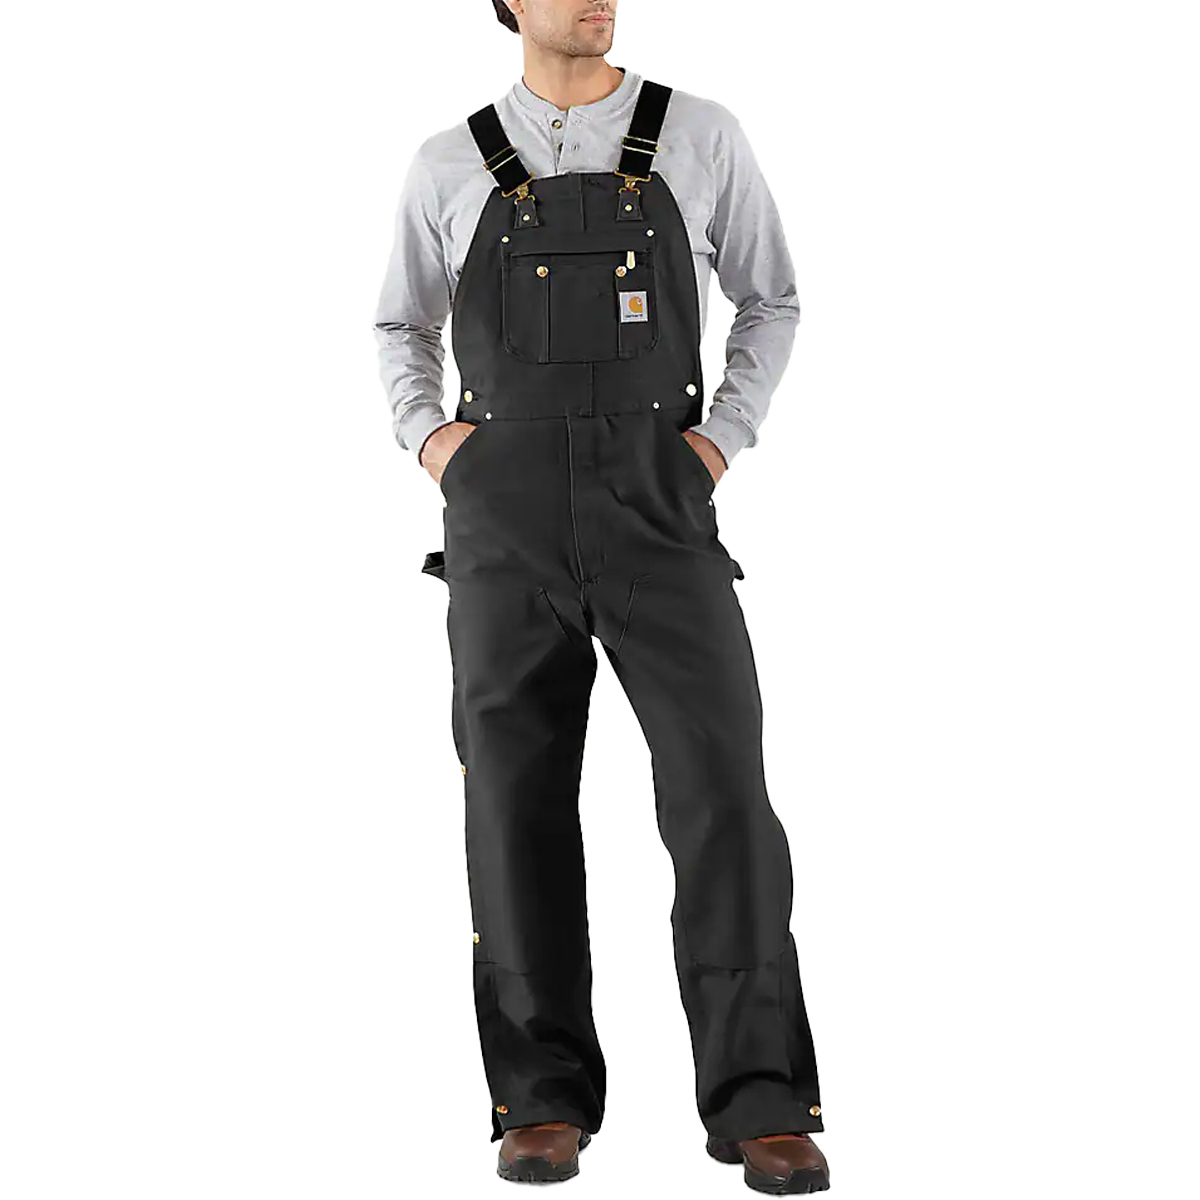 Men's Loose Fit Firm Duck Bib Overall alternate view